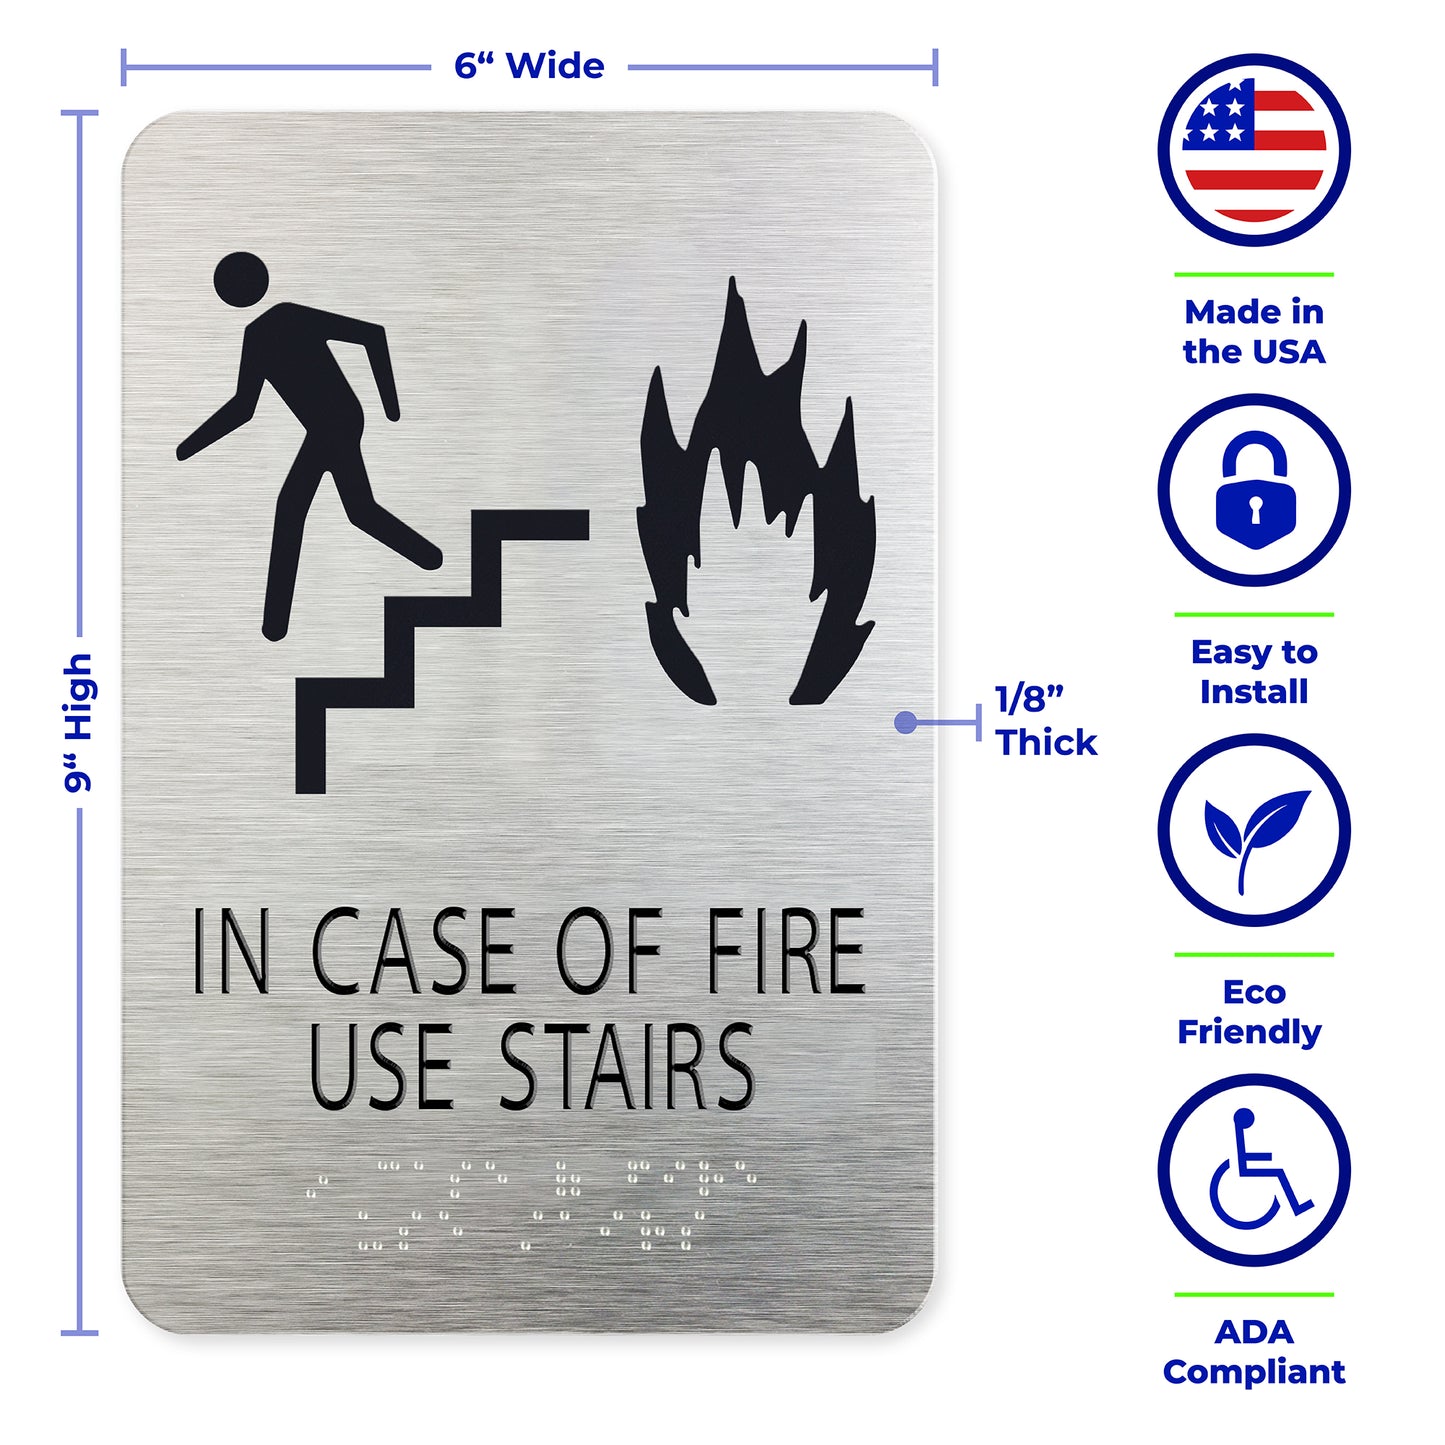 IN CASE OF FIRE Use Stairs sign , ADA Compliant, Man, Fire & Stair Symbols, Brushed Silver, Raised Black Text, Non-Tactile Pictograms, Grade 2 Braille, 6"x9"